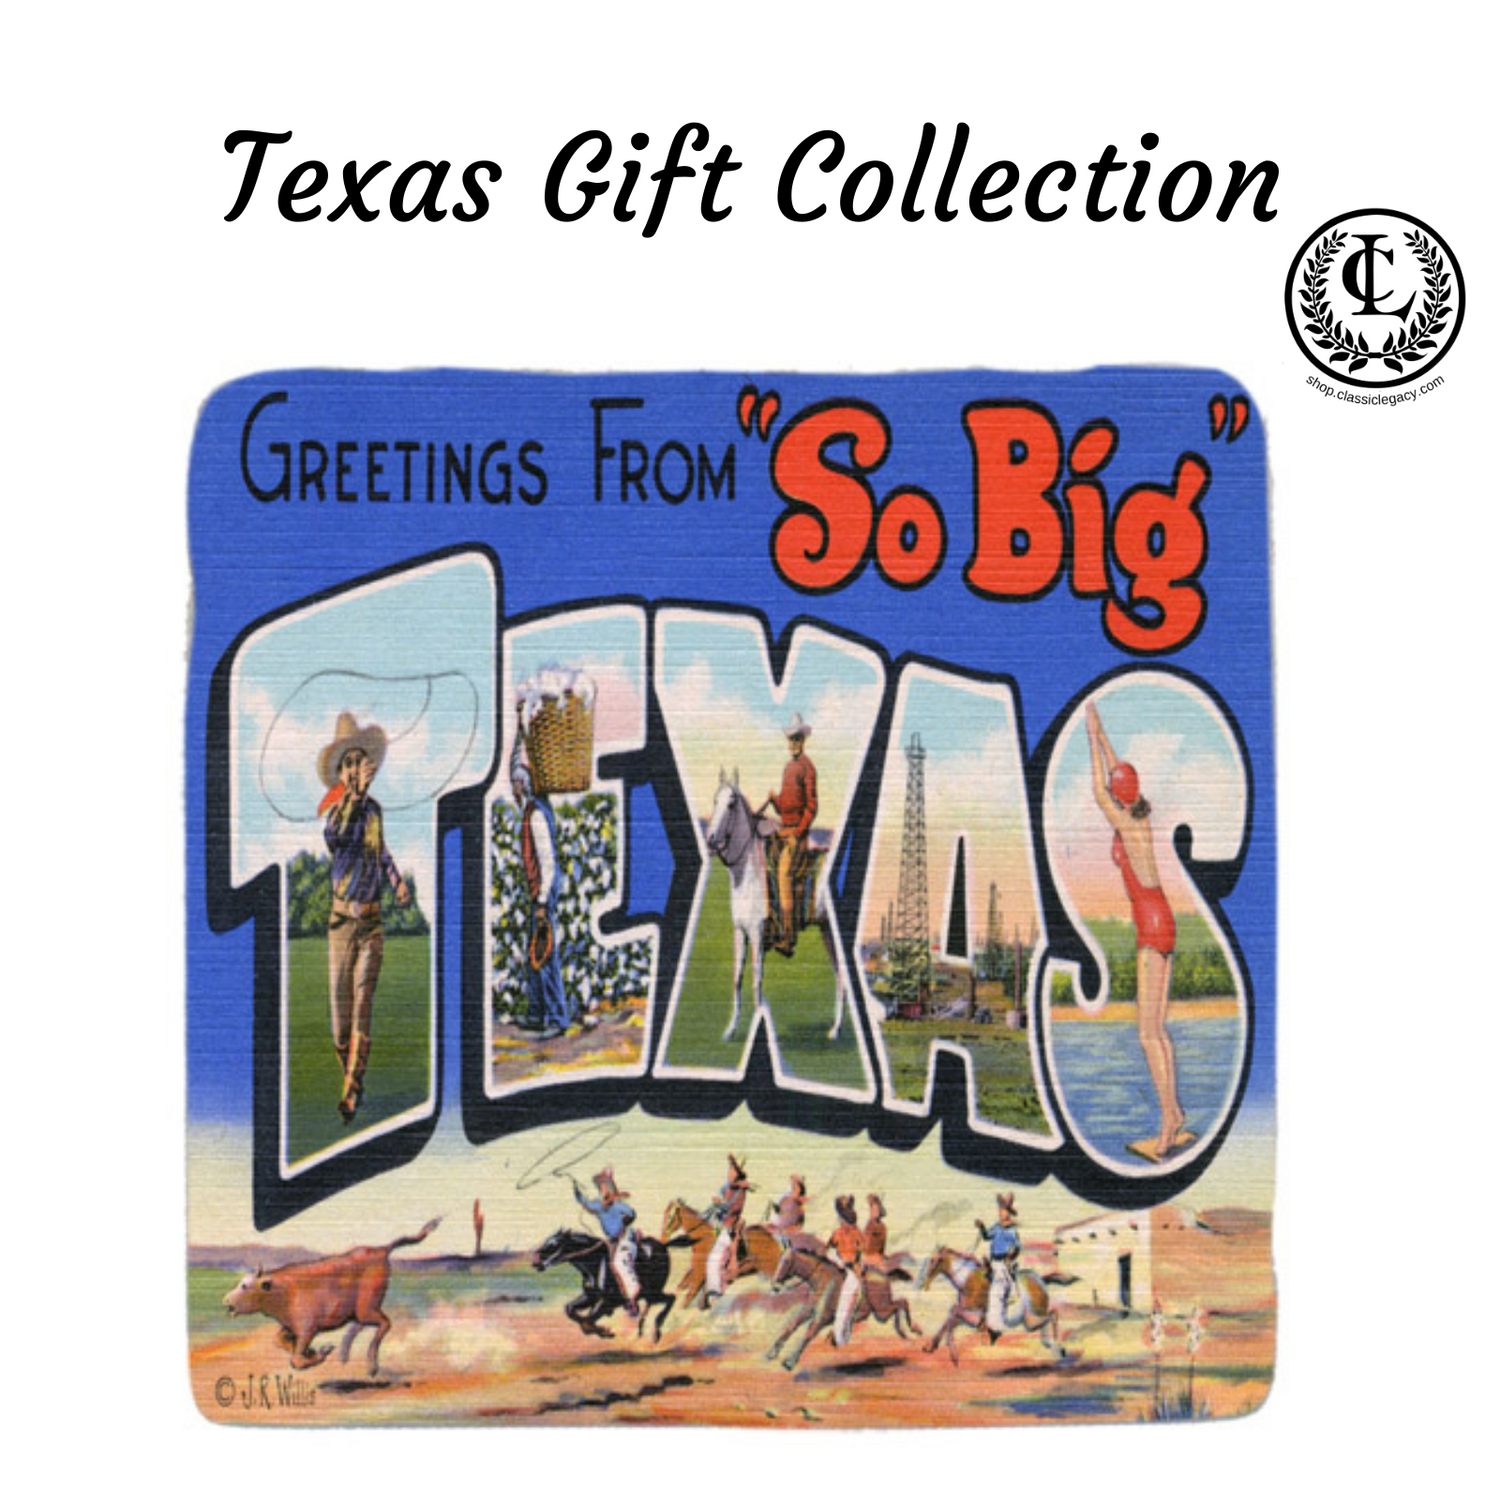 Texas gifts feature vintage postcard art.  Gifts include our marble coaster, marble wine bottle stopper, business card holder, purse mirror, and silver box.